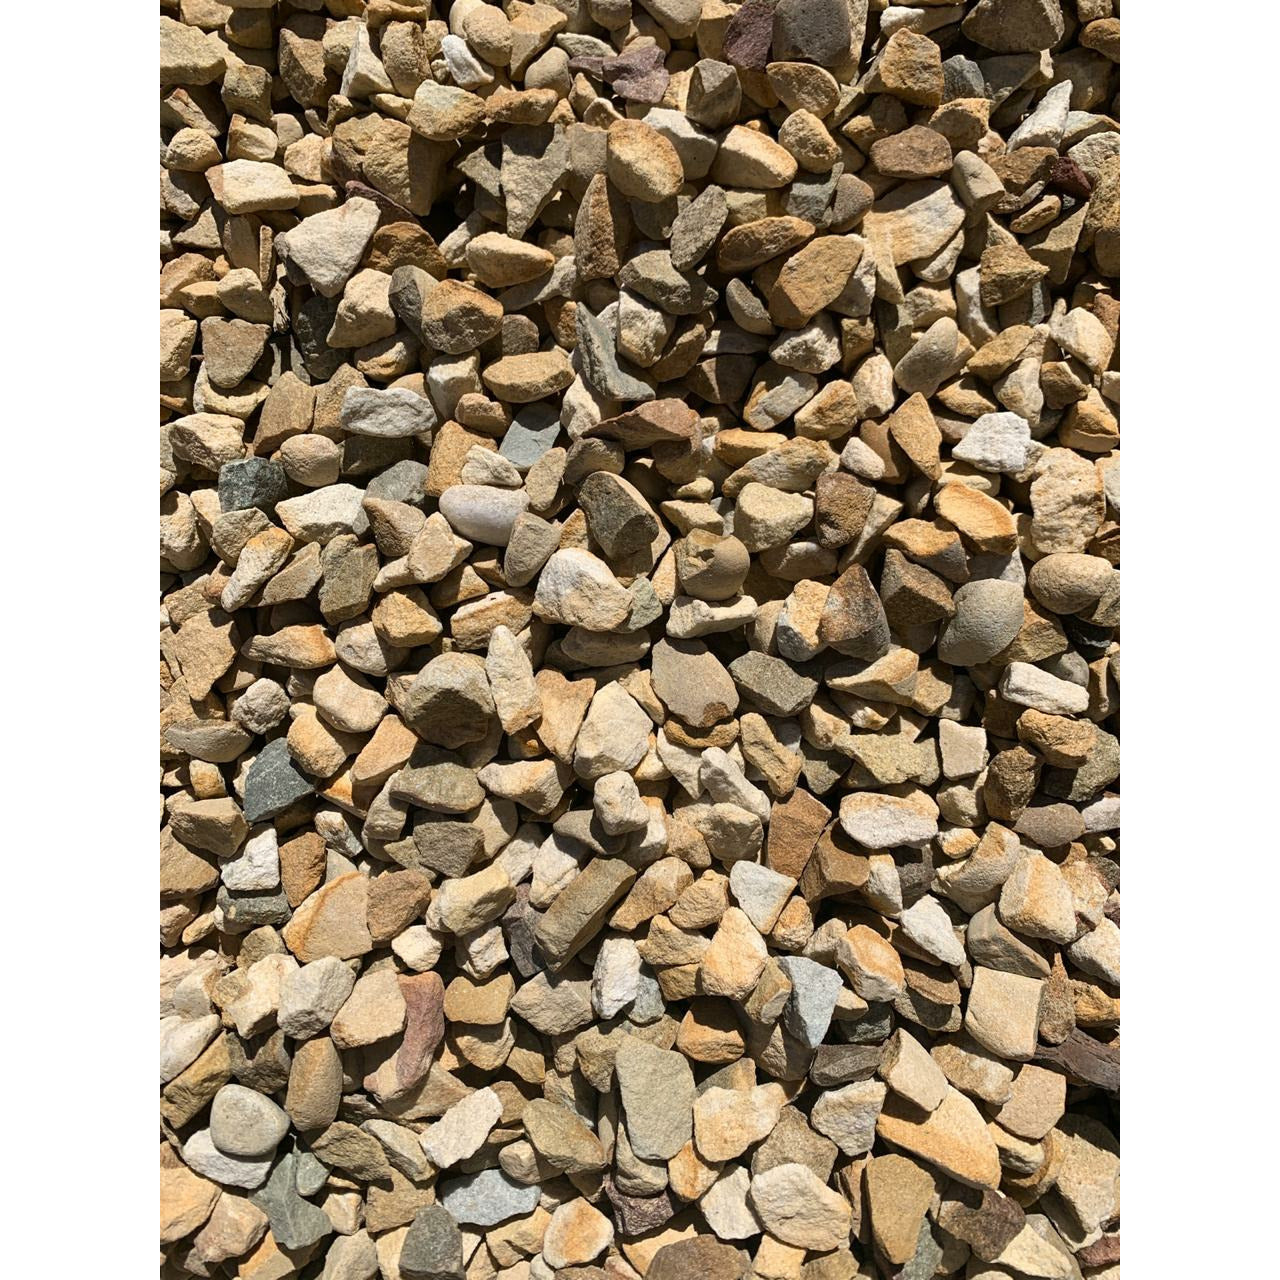 19MM Brown Crushed Stone Gravel -  4 Tons